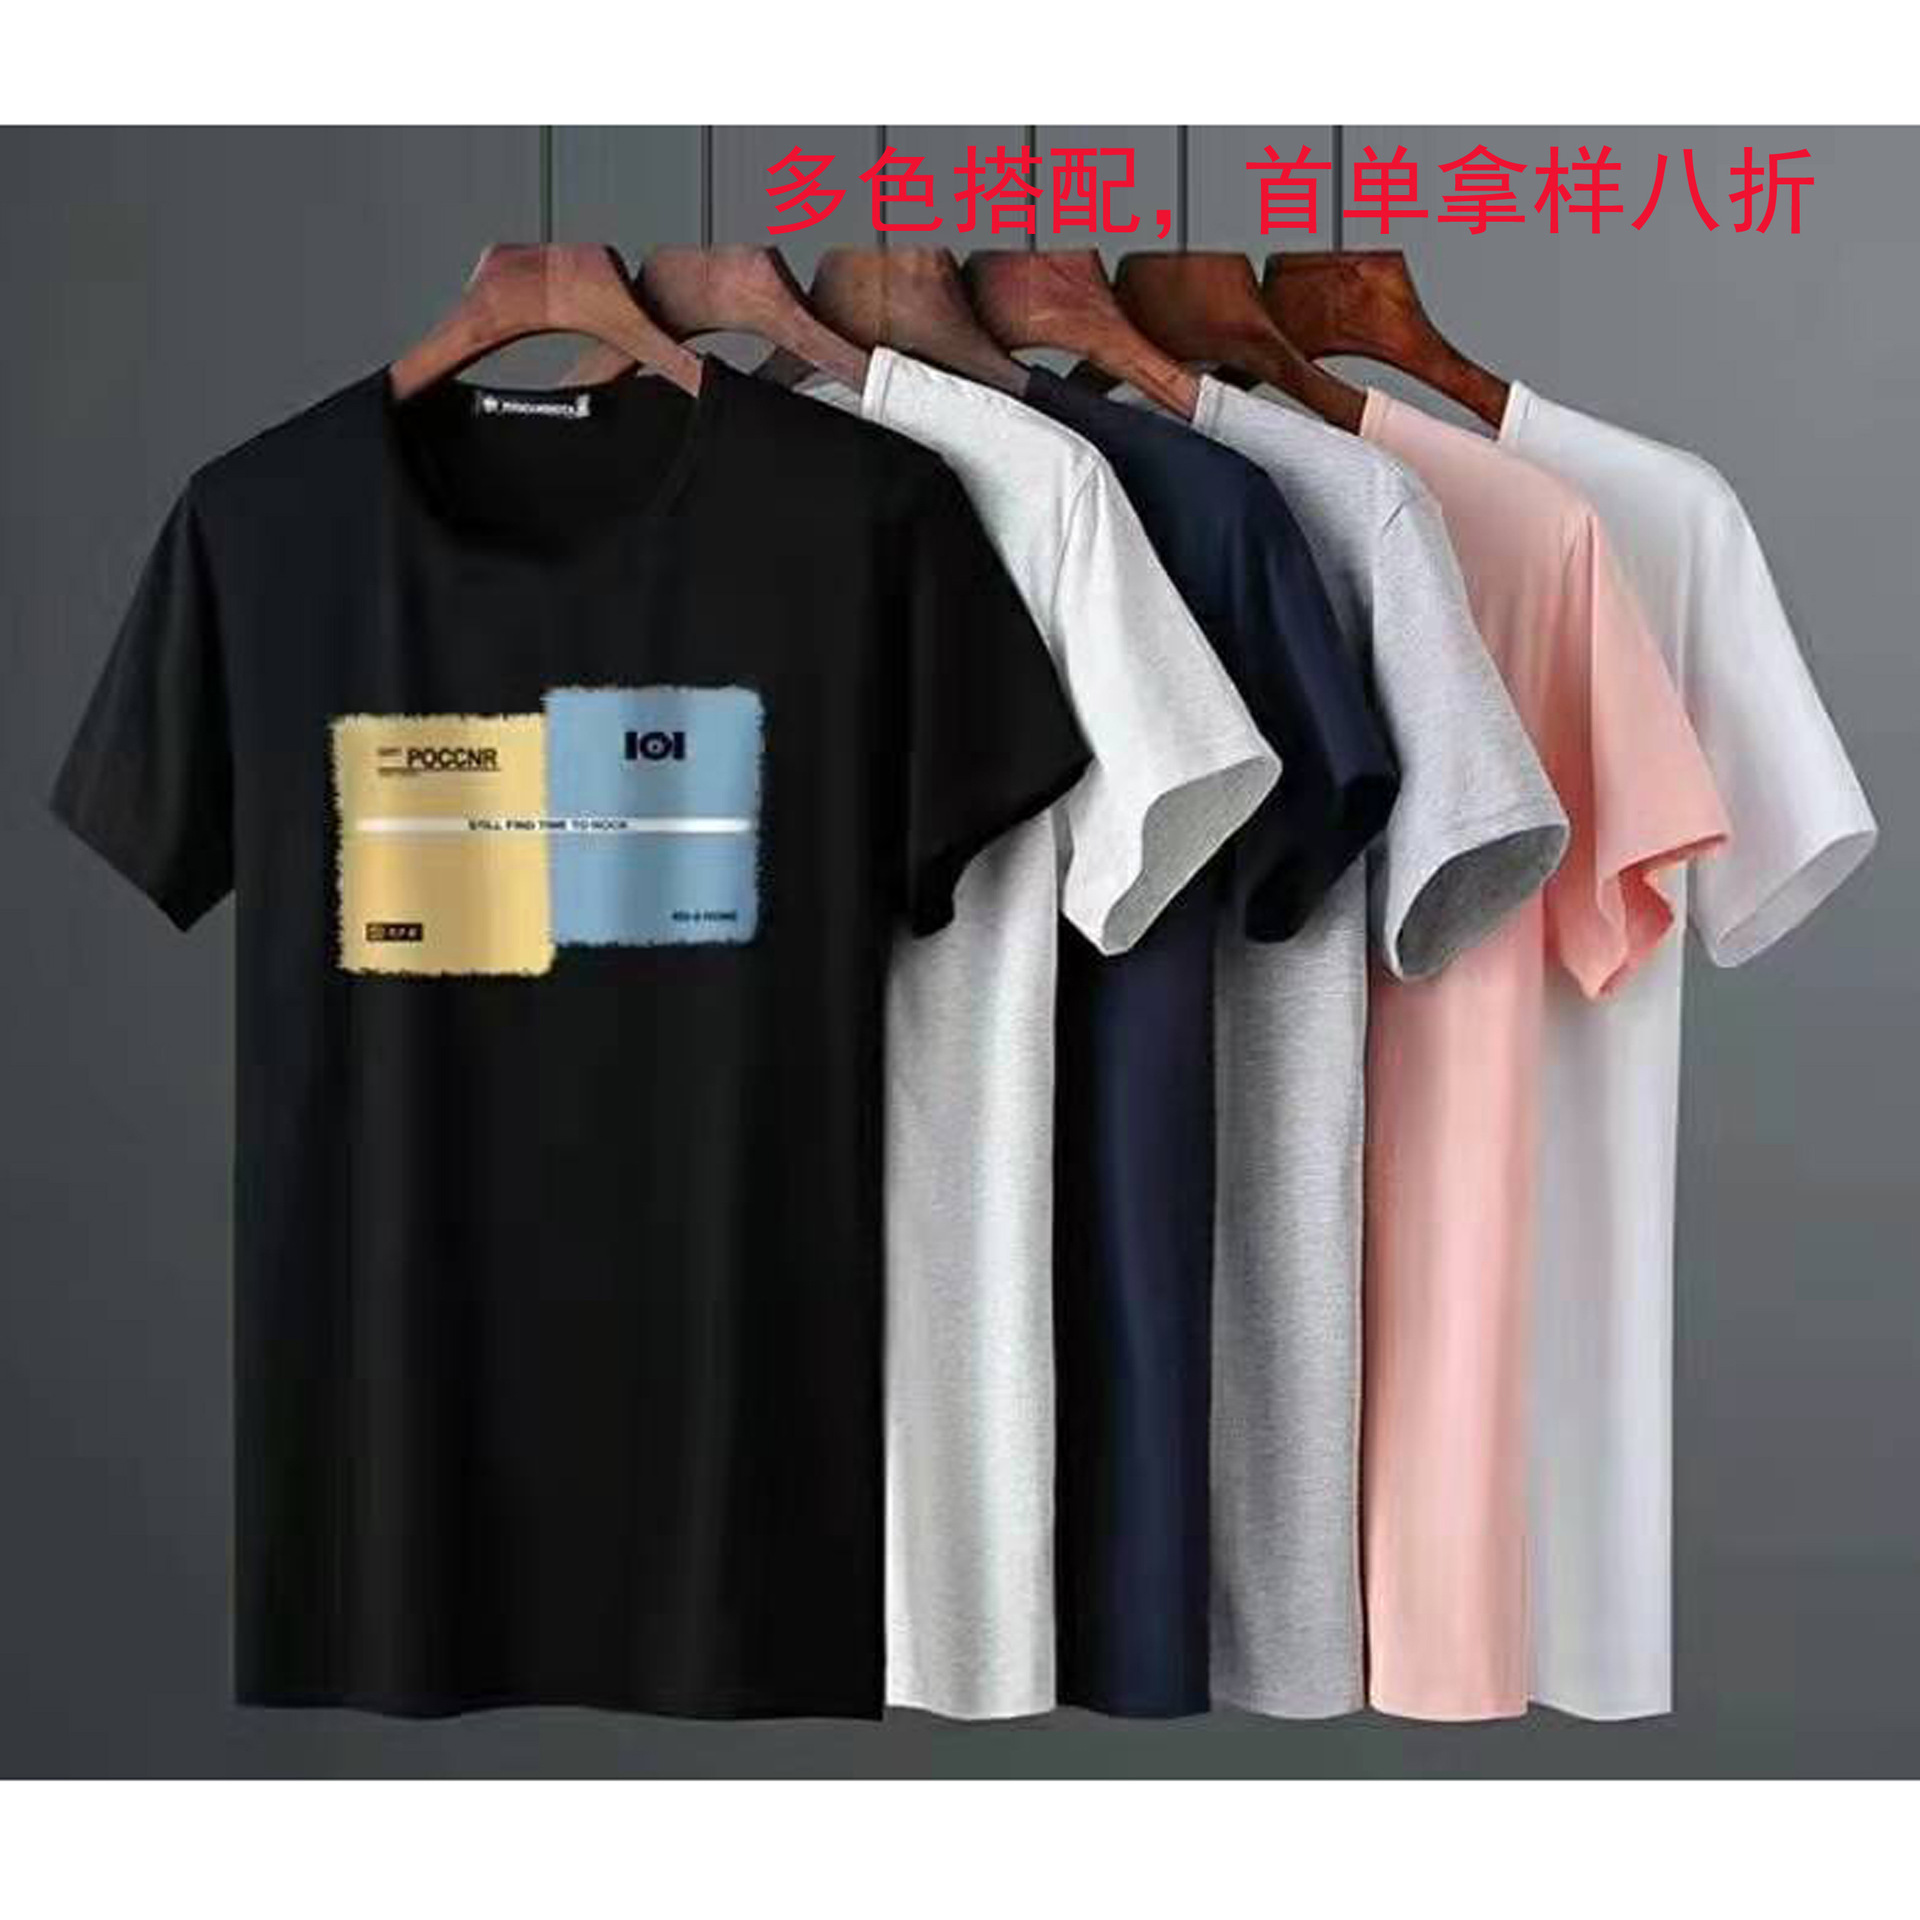 spring and summer 2022 new men‘s short-sleeved t-shirt under 5 yuan fashion brand large size men‘s stall running quantity supply 168